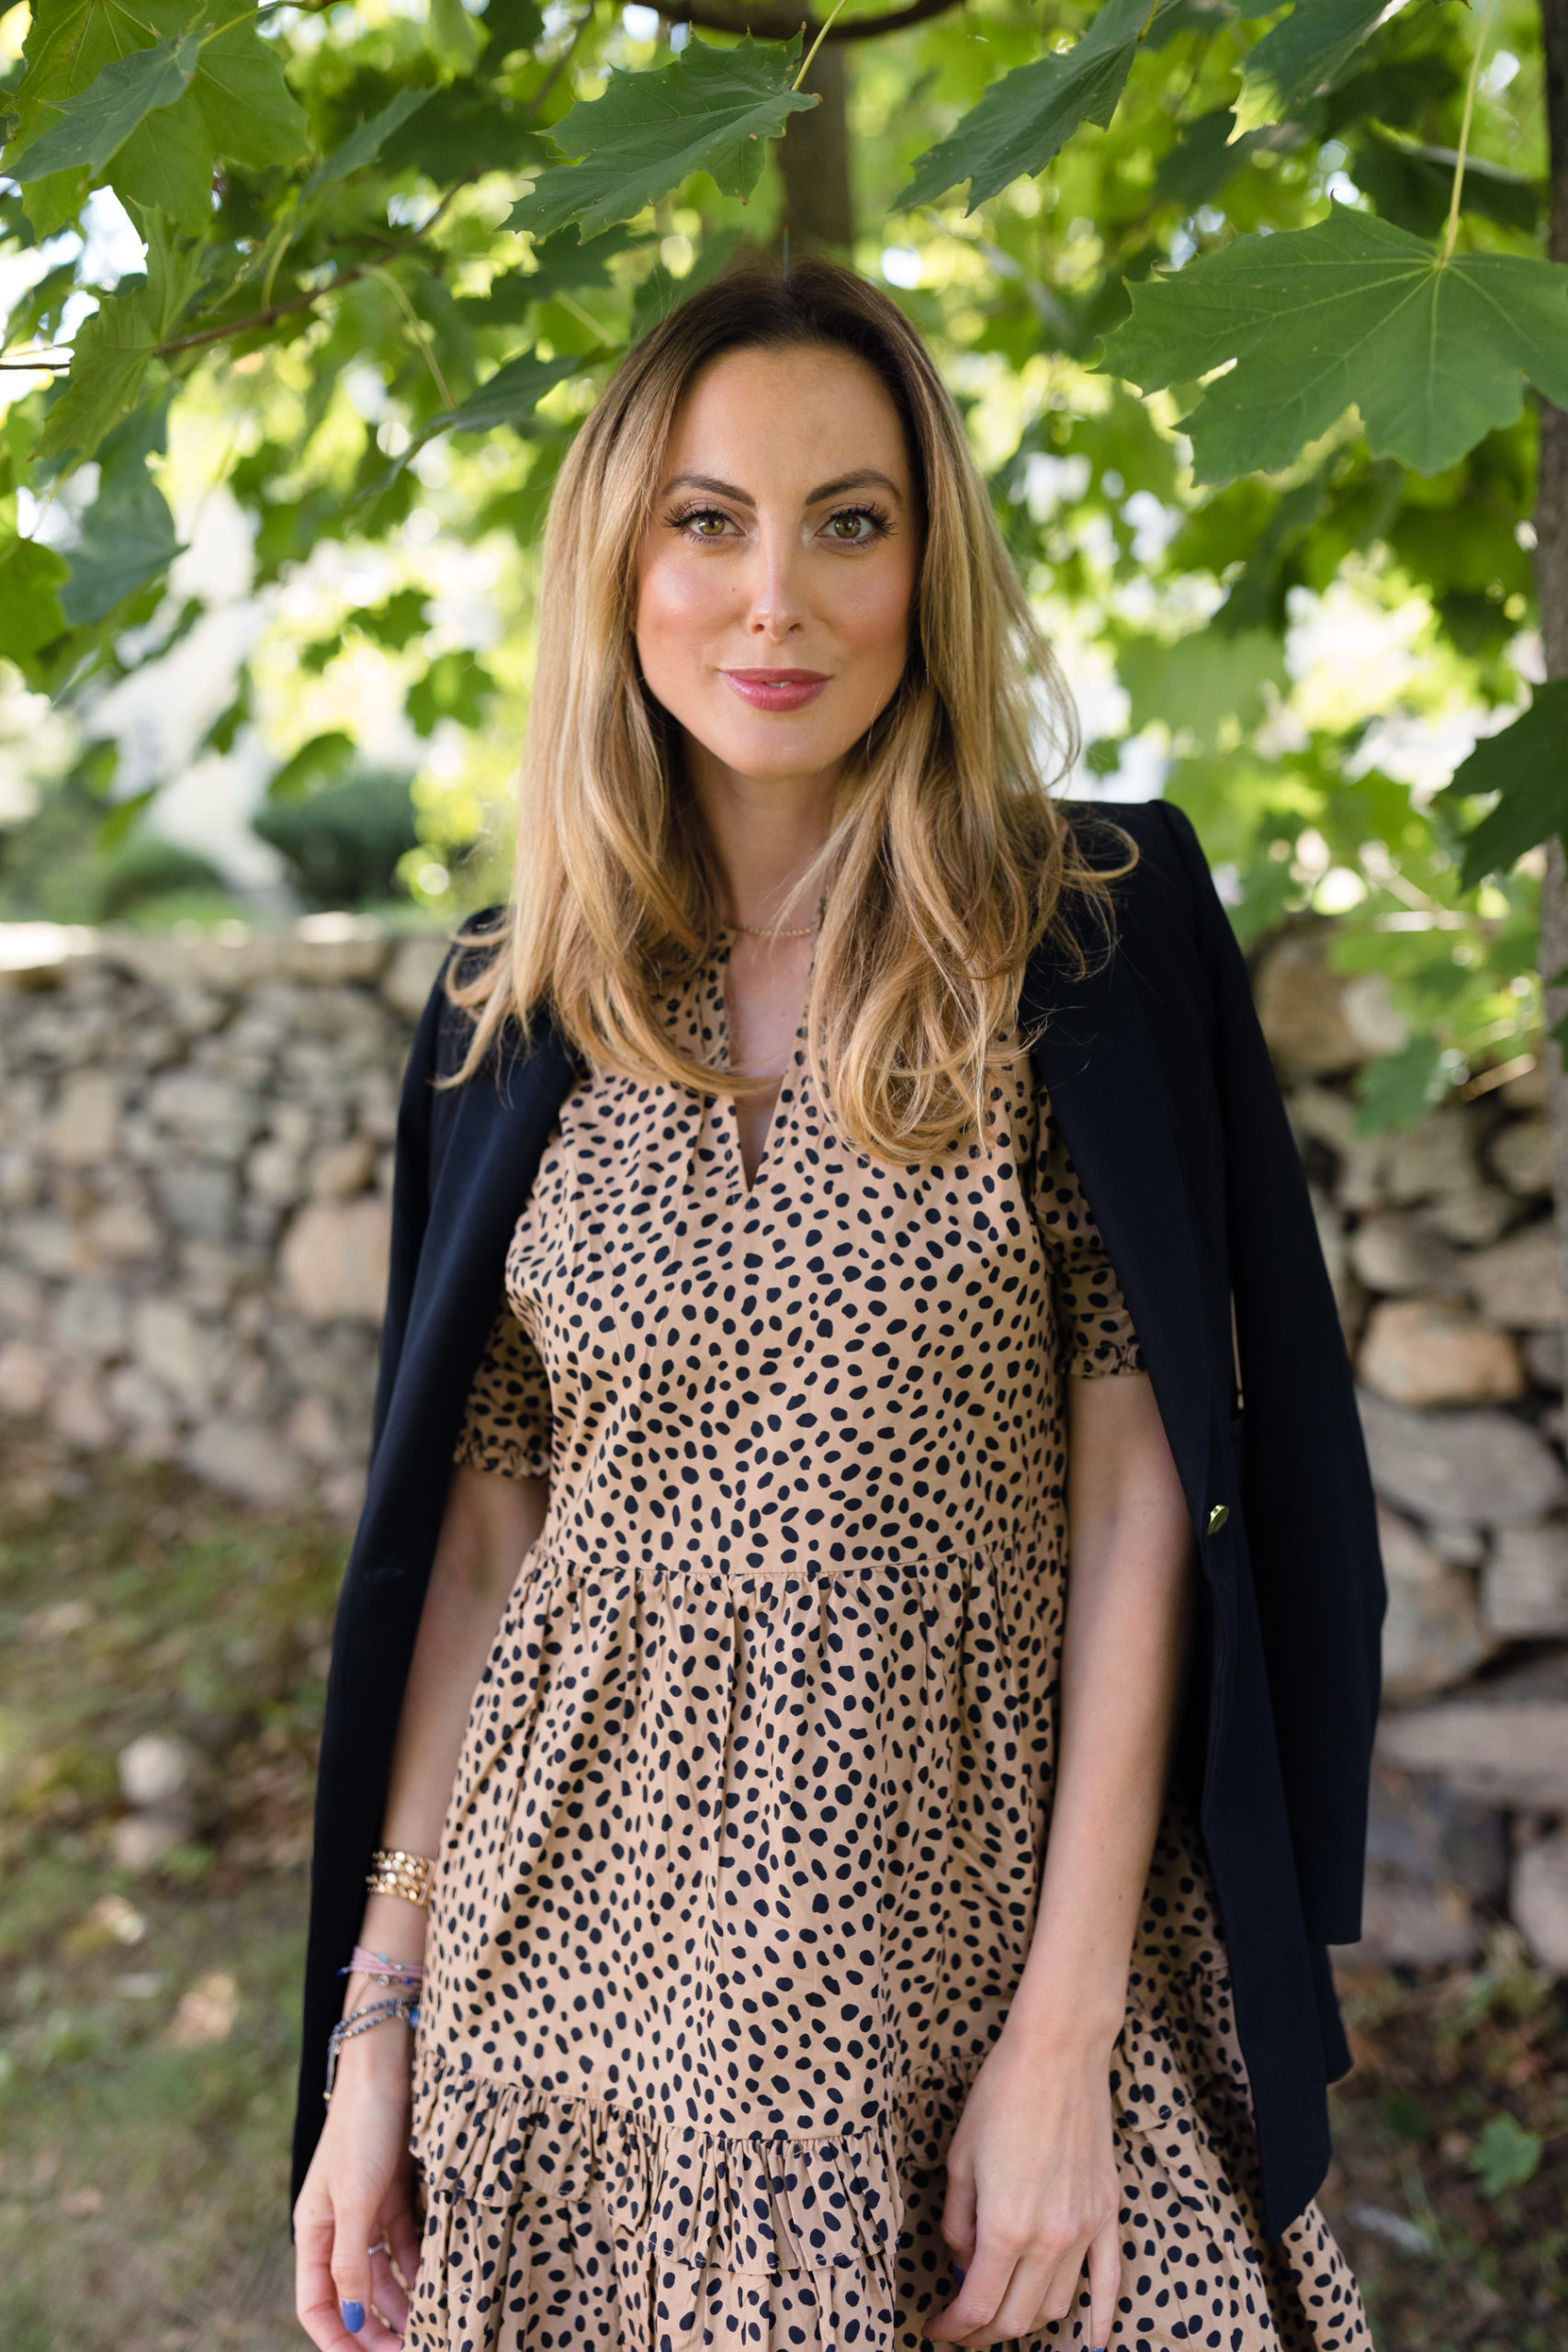 Eva Amurri shares her favorite fall transitional style pieces